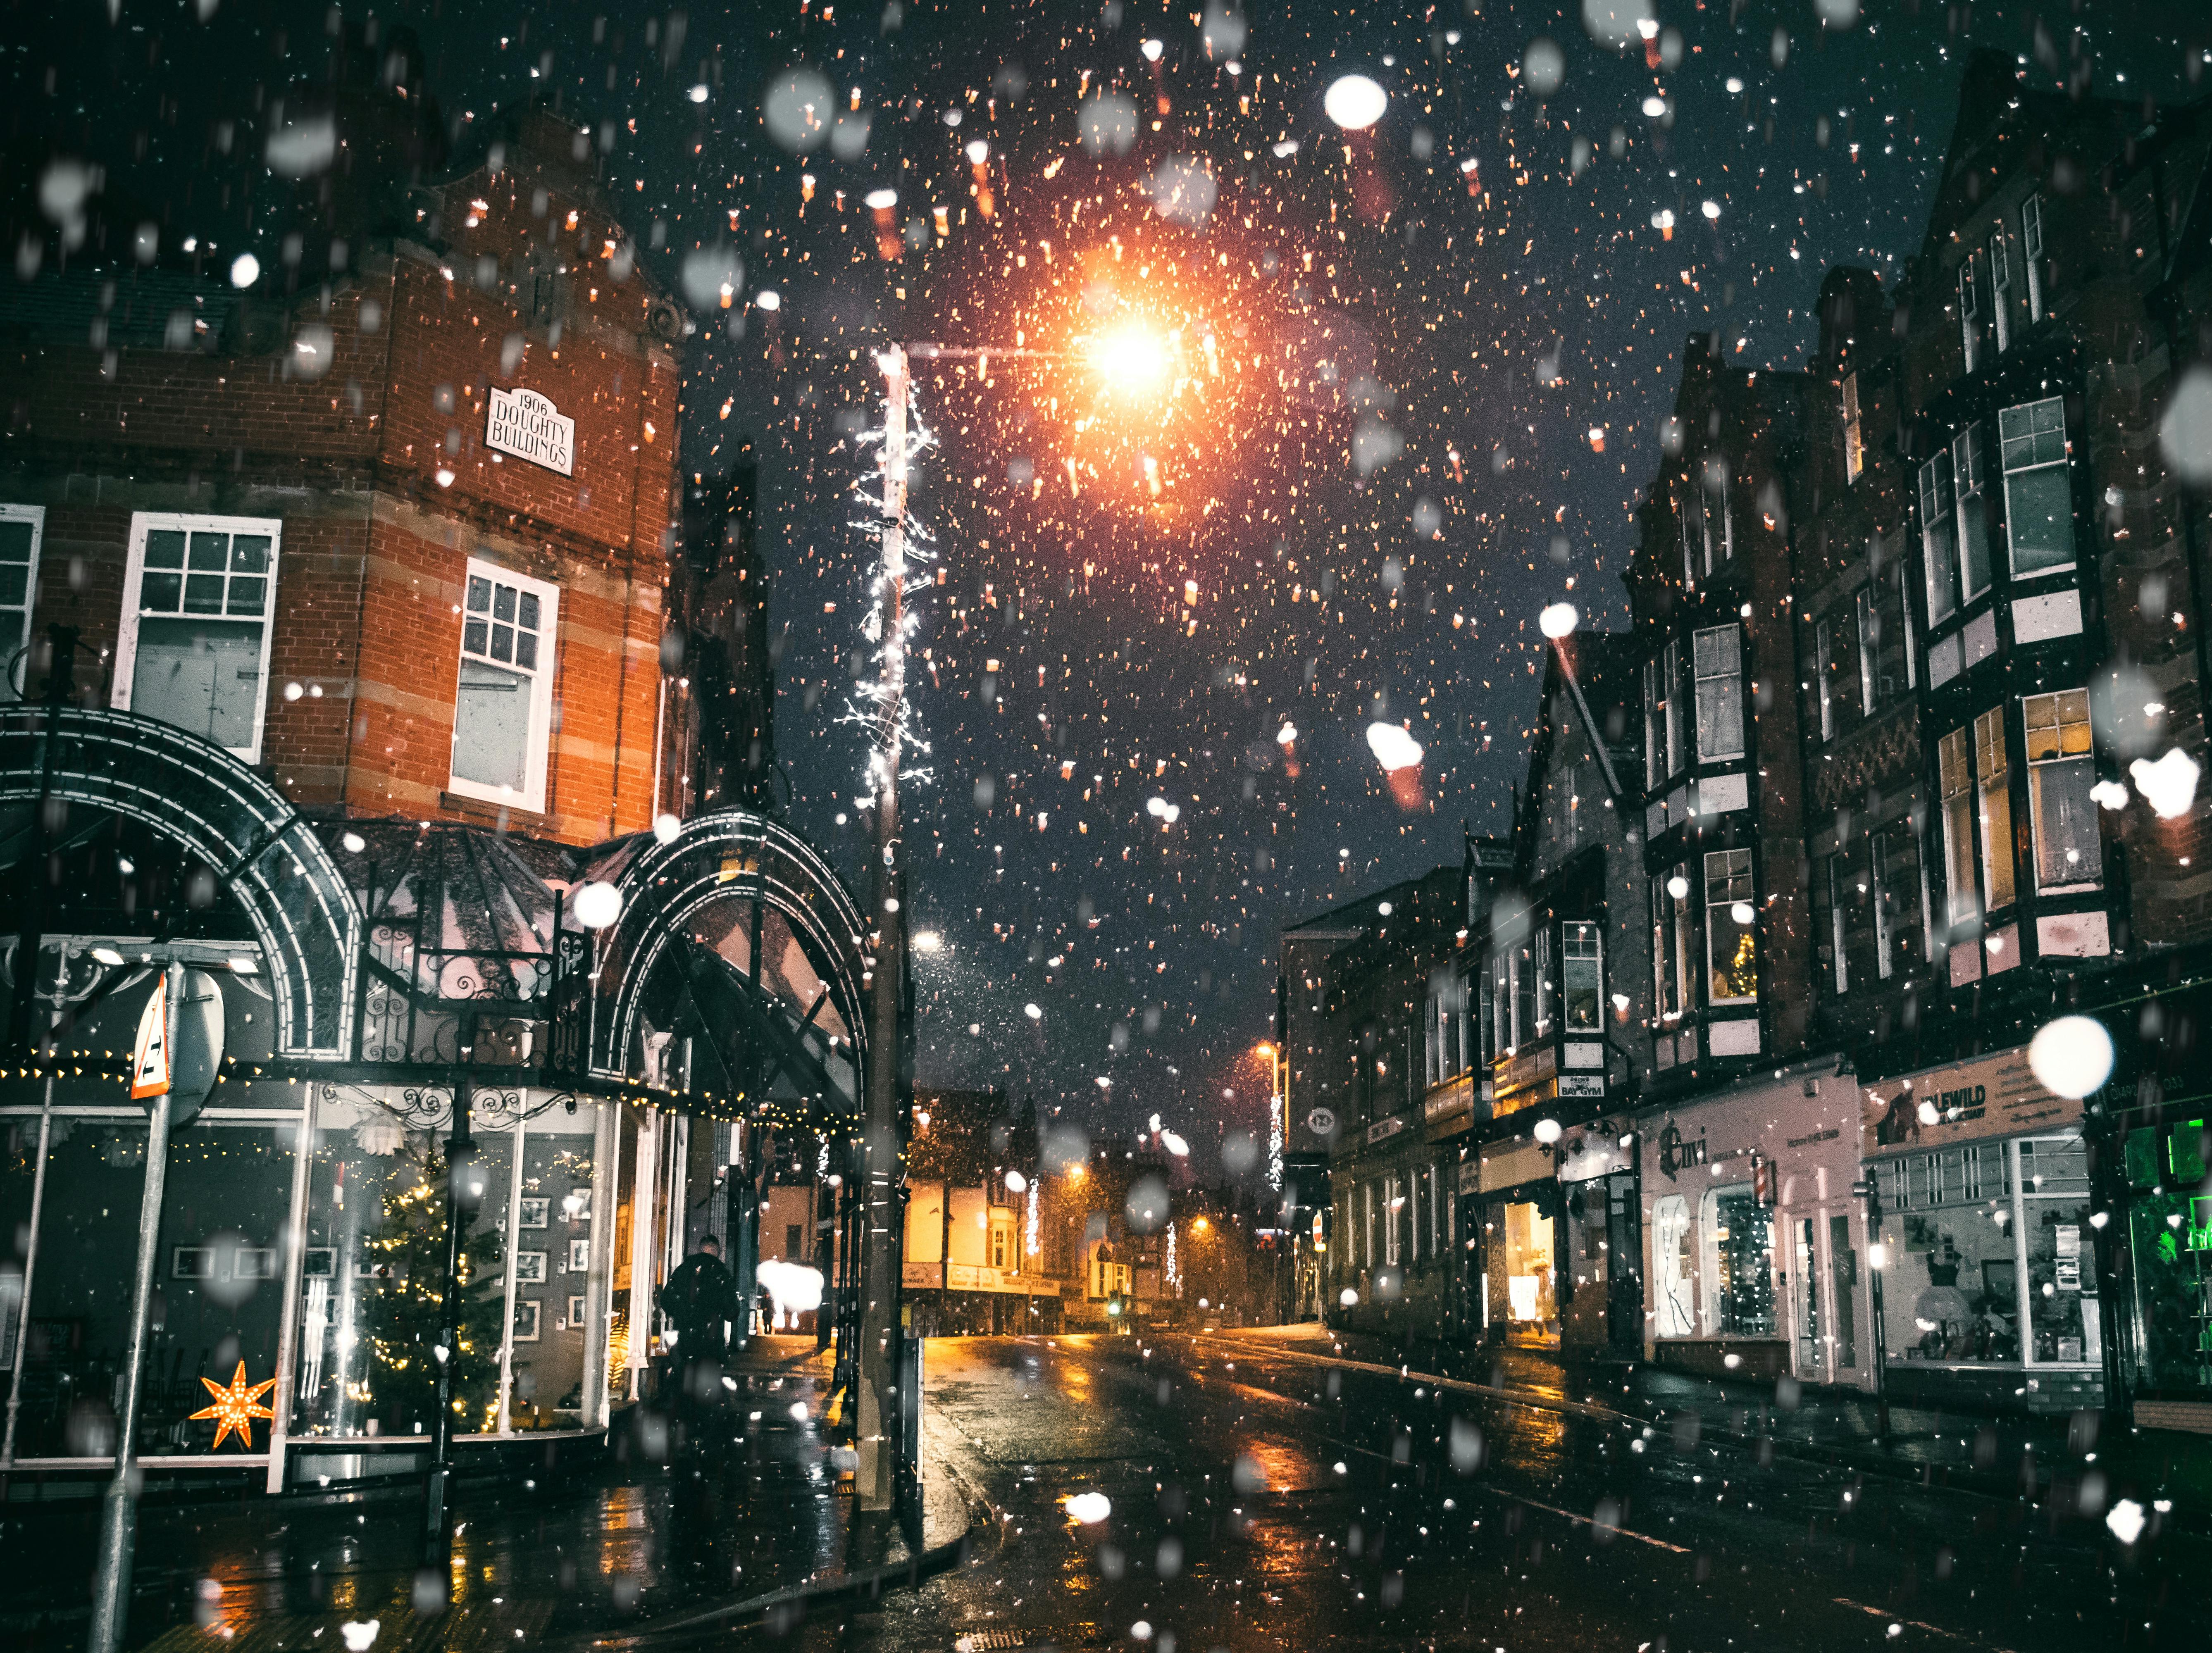 Snowfall Photos, Download The BEST Free Snowfall Stock Photos & HD Images